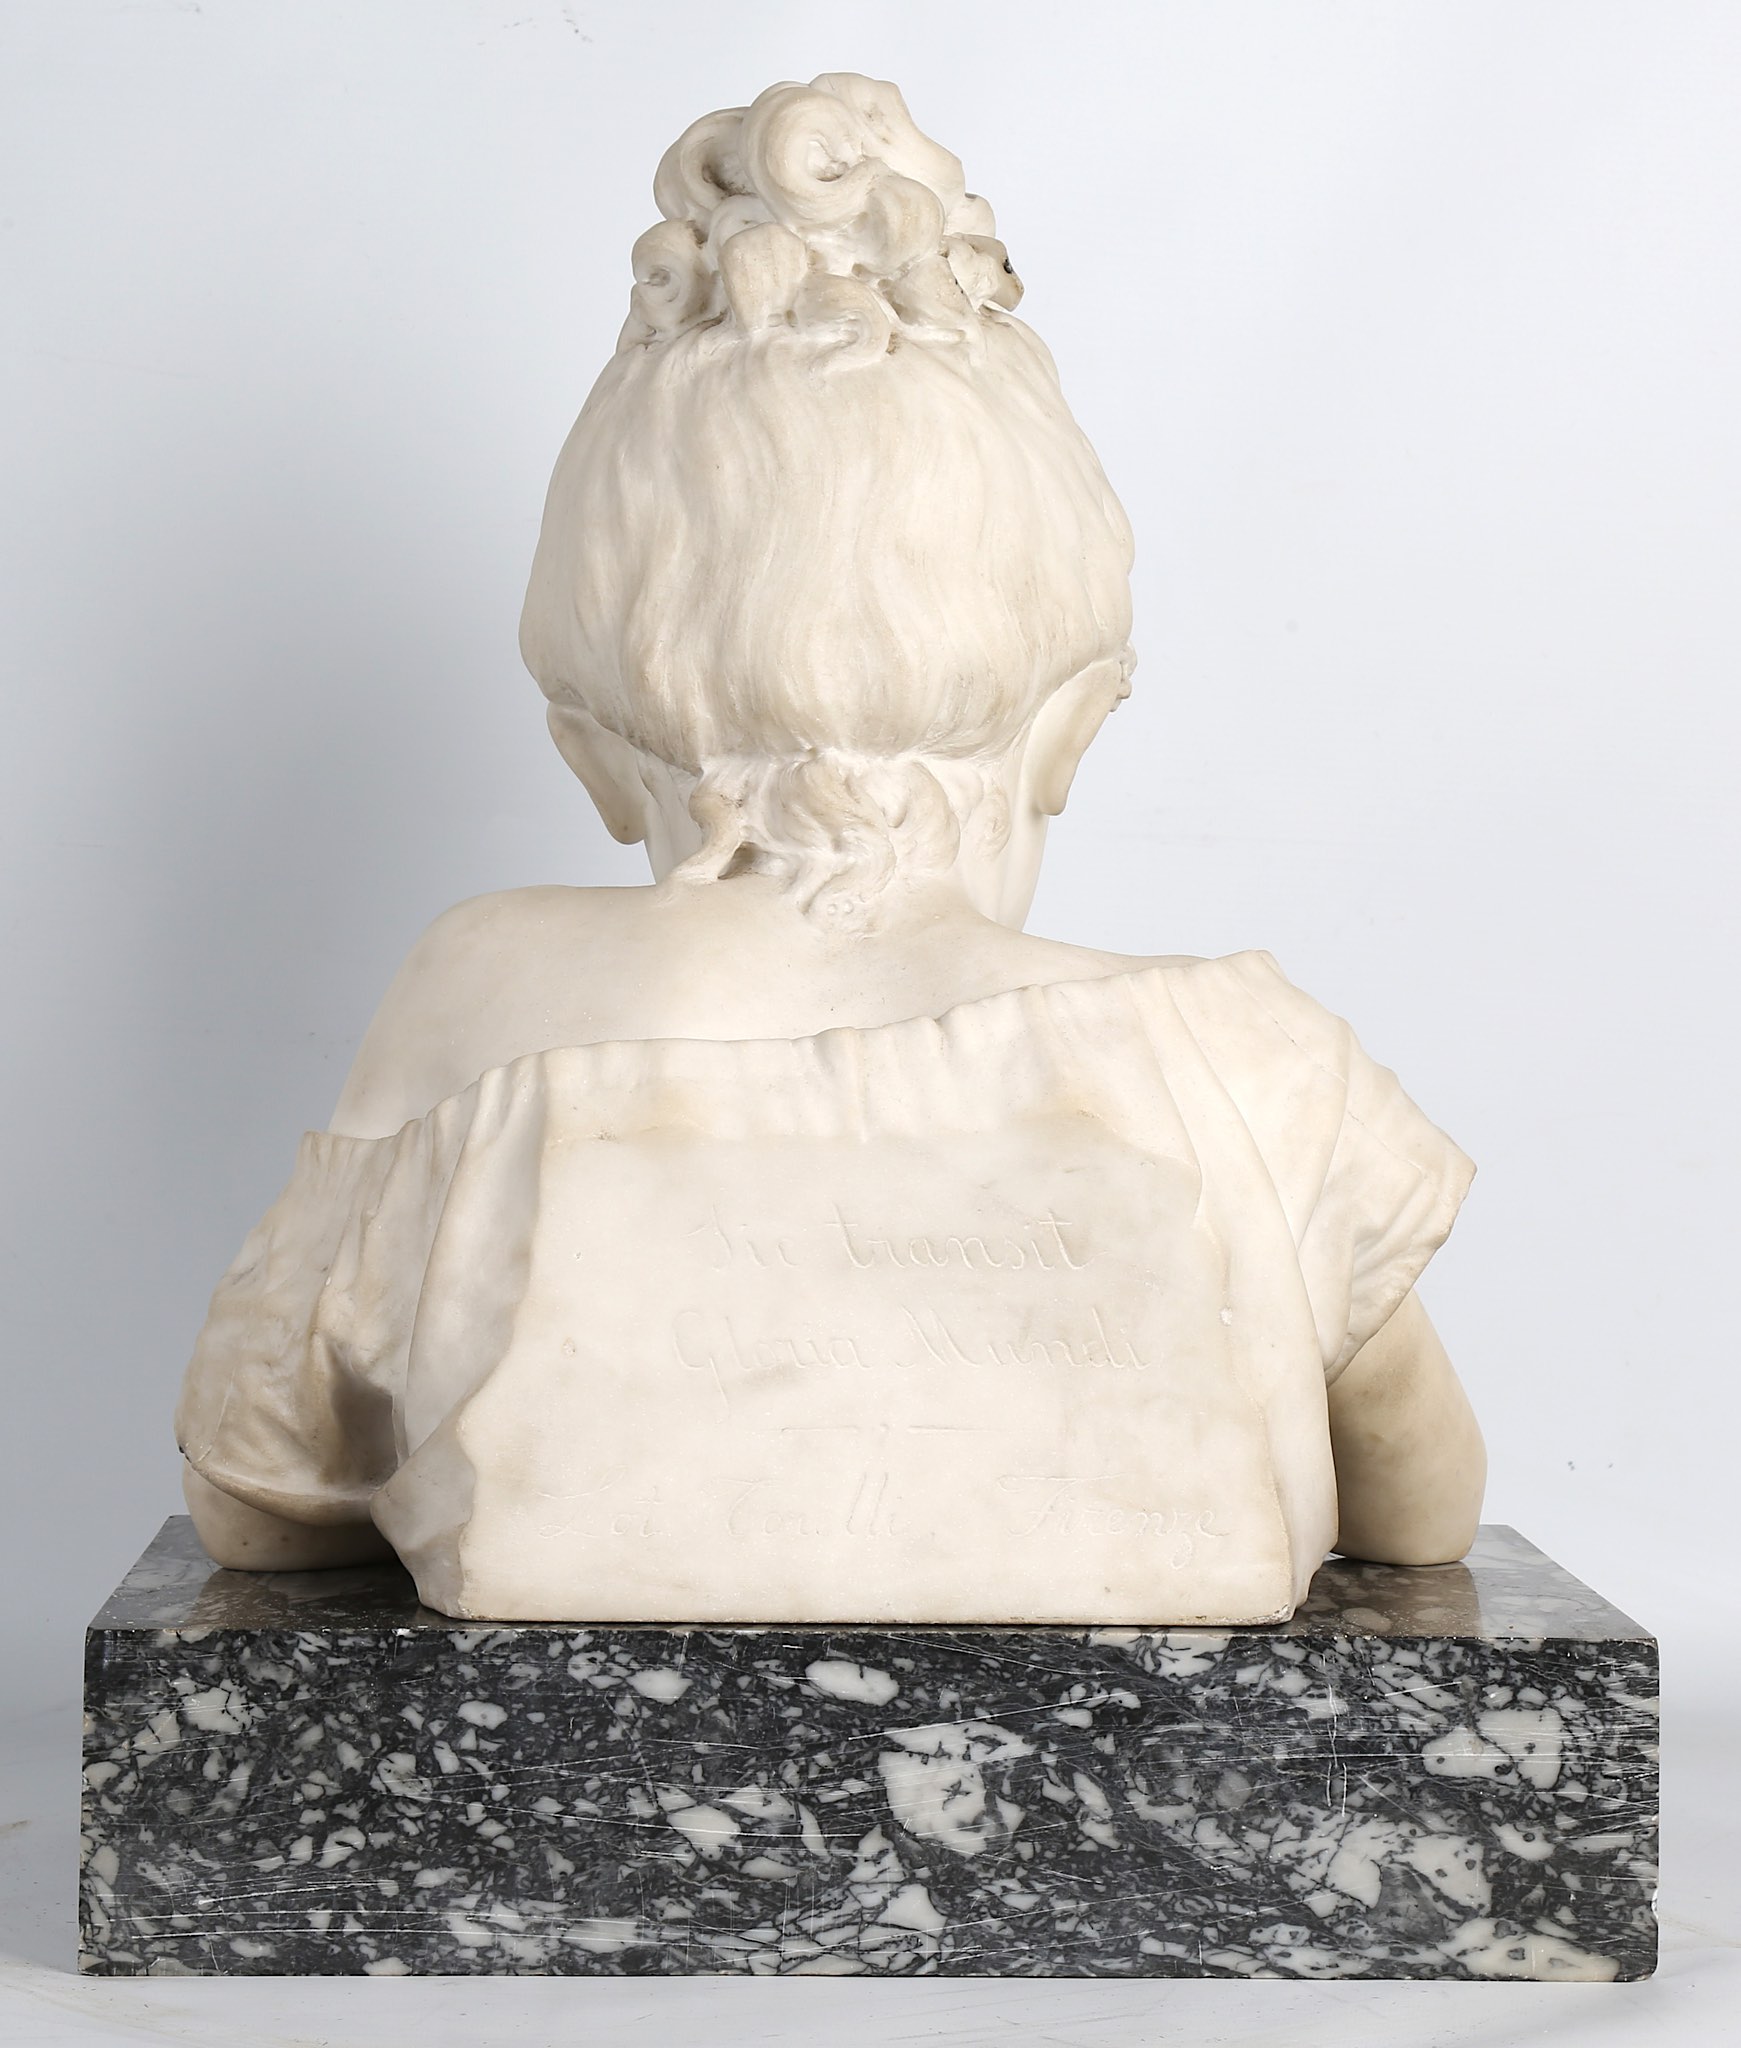 LOT TORELLI (ITALIAN, 1835-1896): 'SOAP BUBBLES', A MARBLE FIGURE OF A GIRL BLOWING BUBBLES ON A - Image 8 of 9